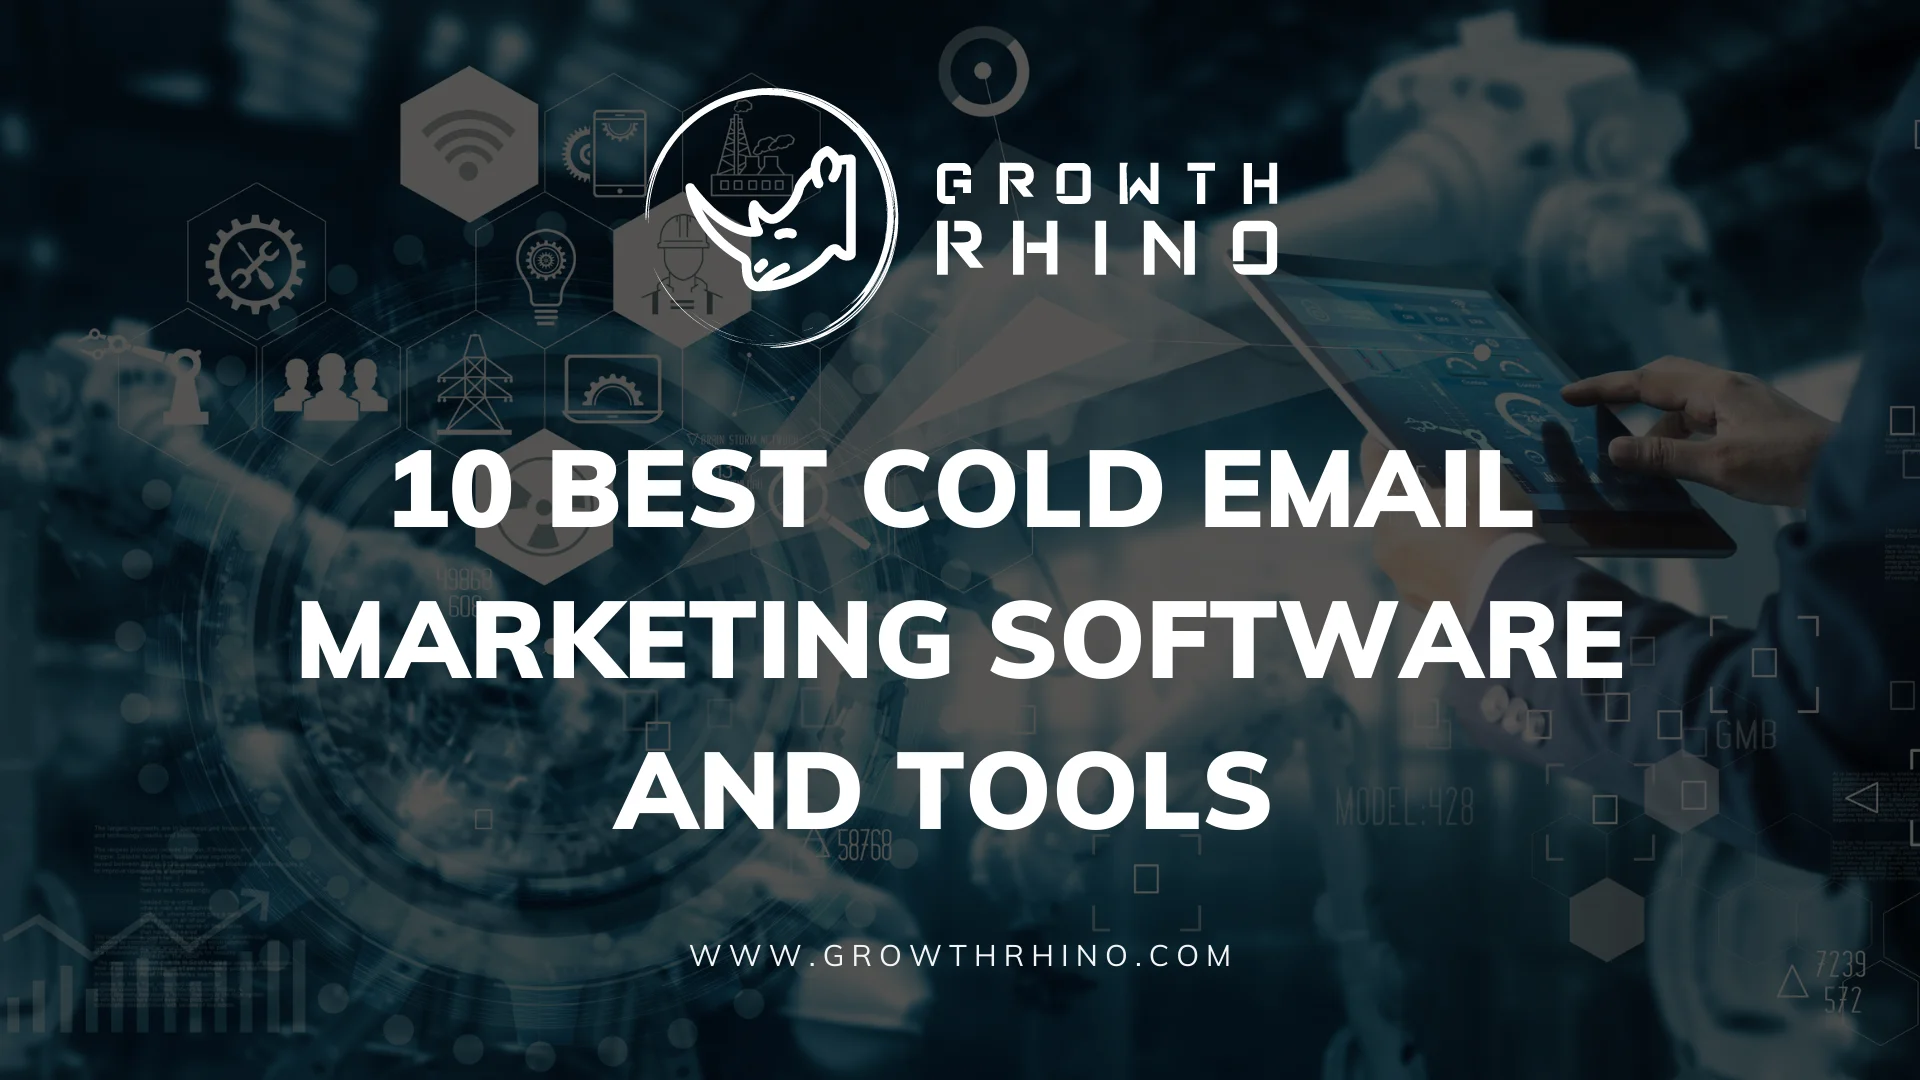 10 Best Cold Email Marketing Software and Tools for 2022